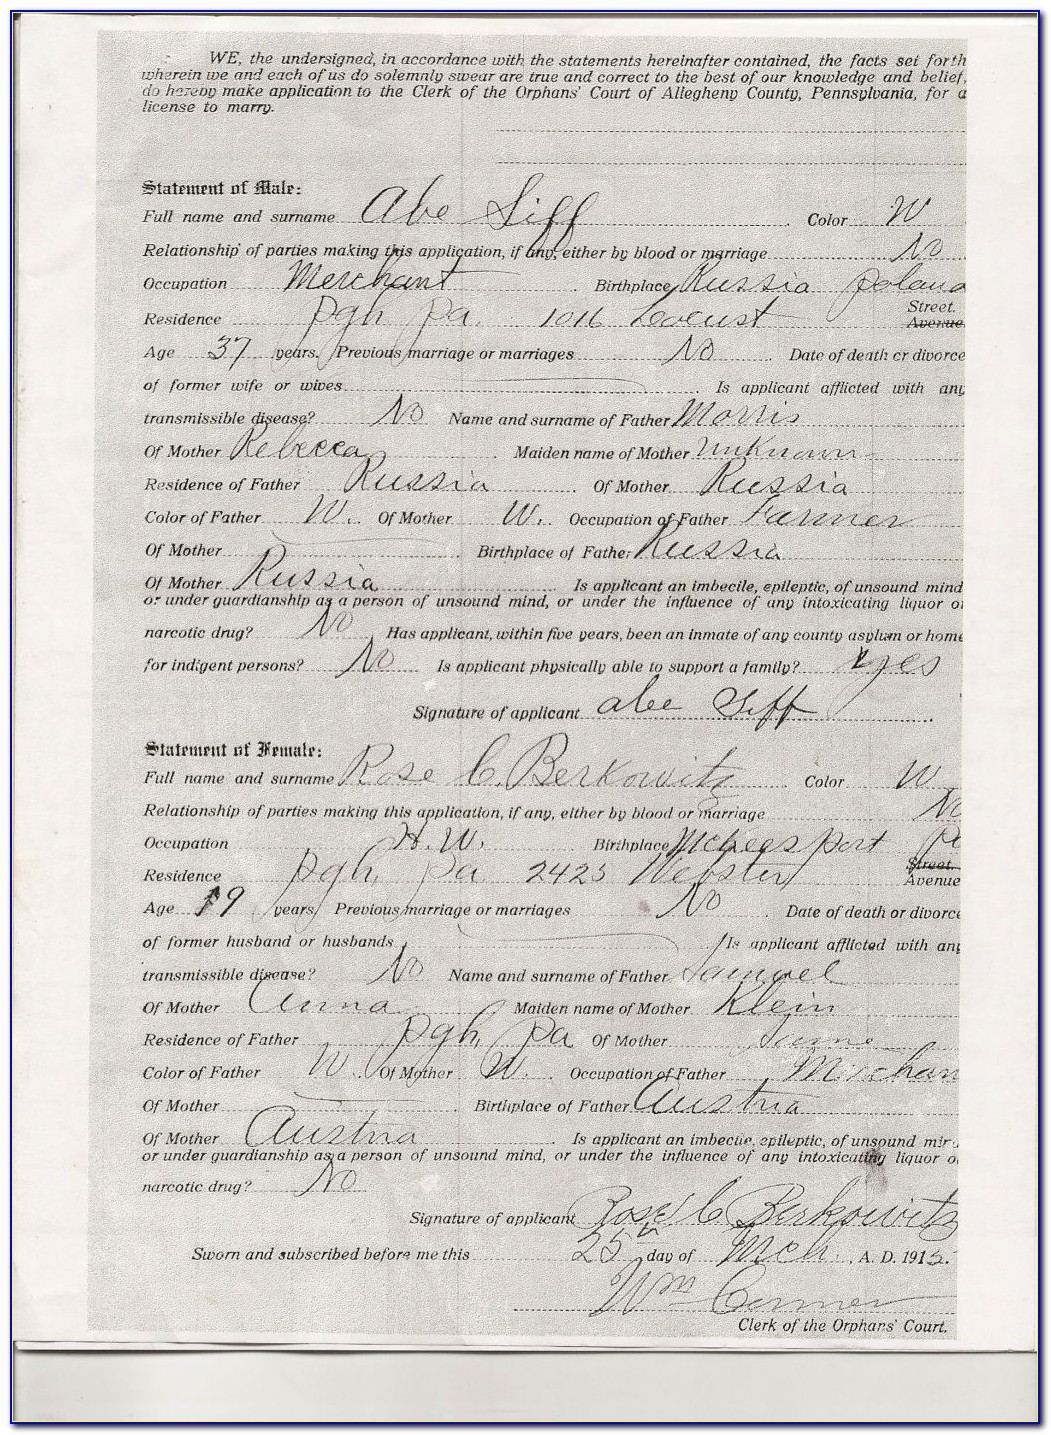 Allegheny County Birth Certificate Copy